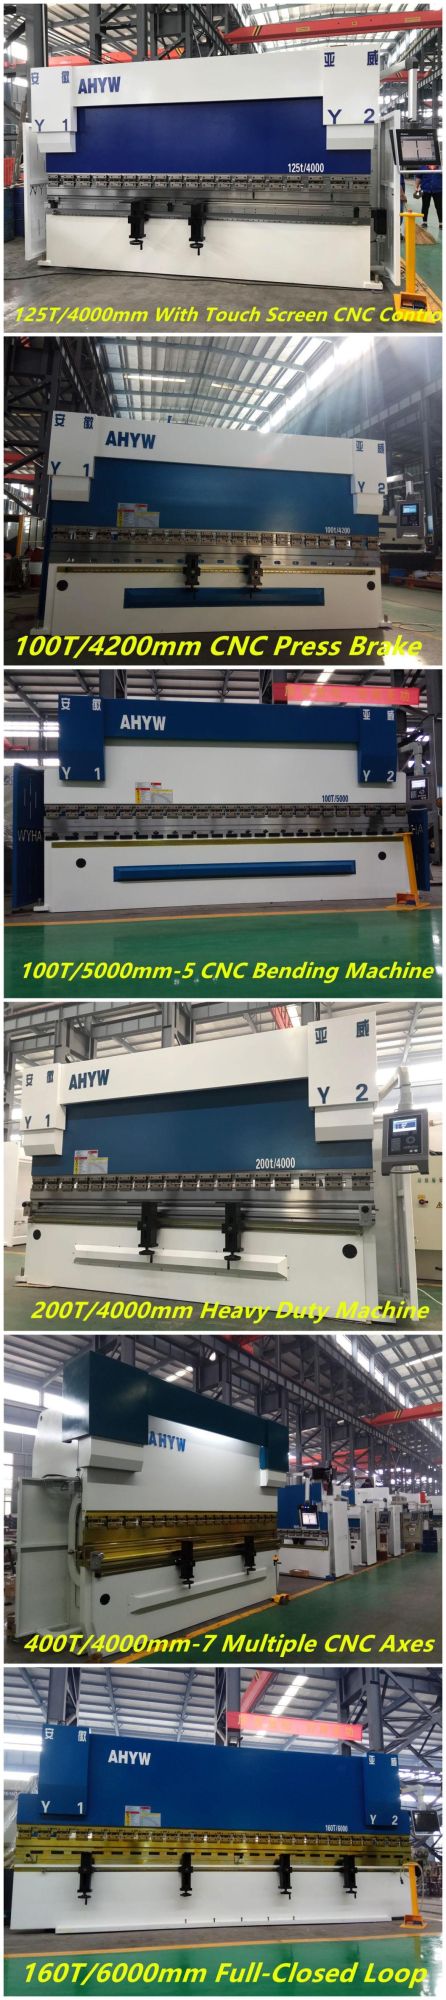 Midwest Press Brake From Anhui Yawei with Ahyw Logo for Metal Sheet Bending